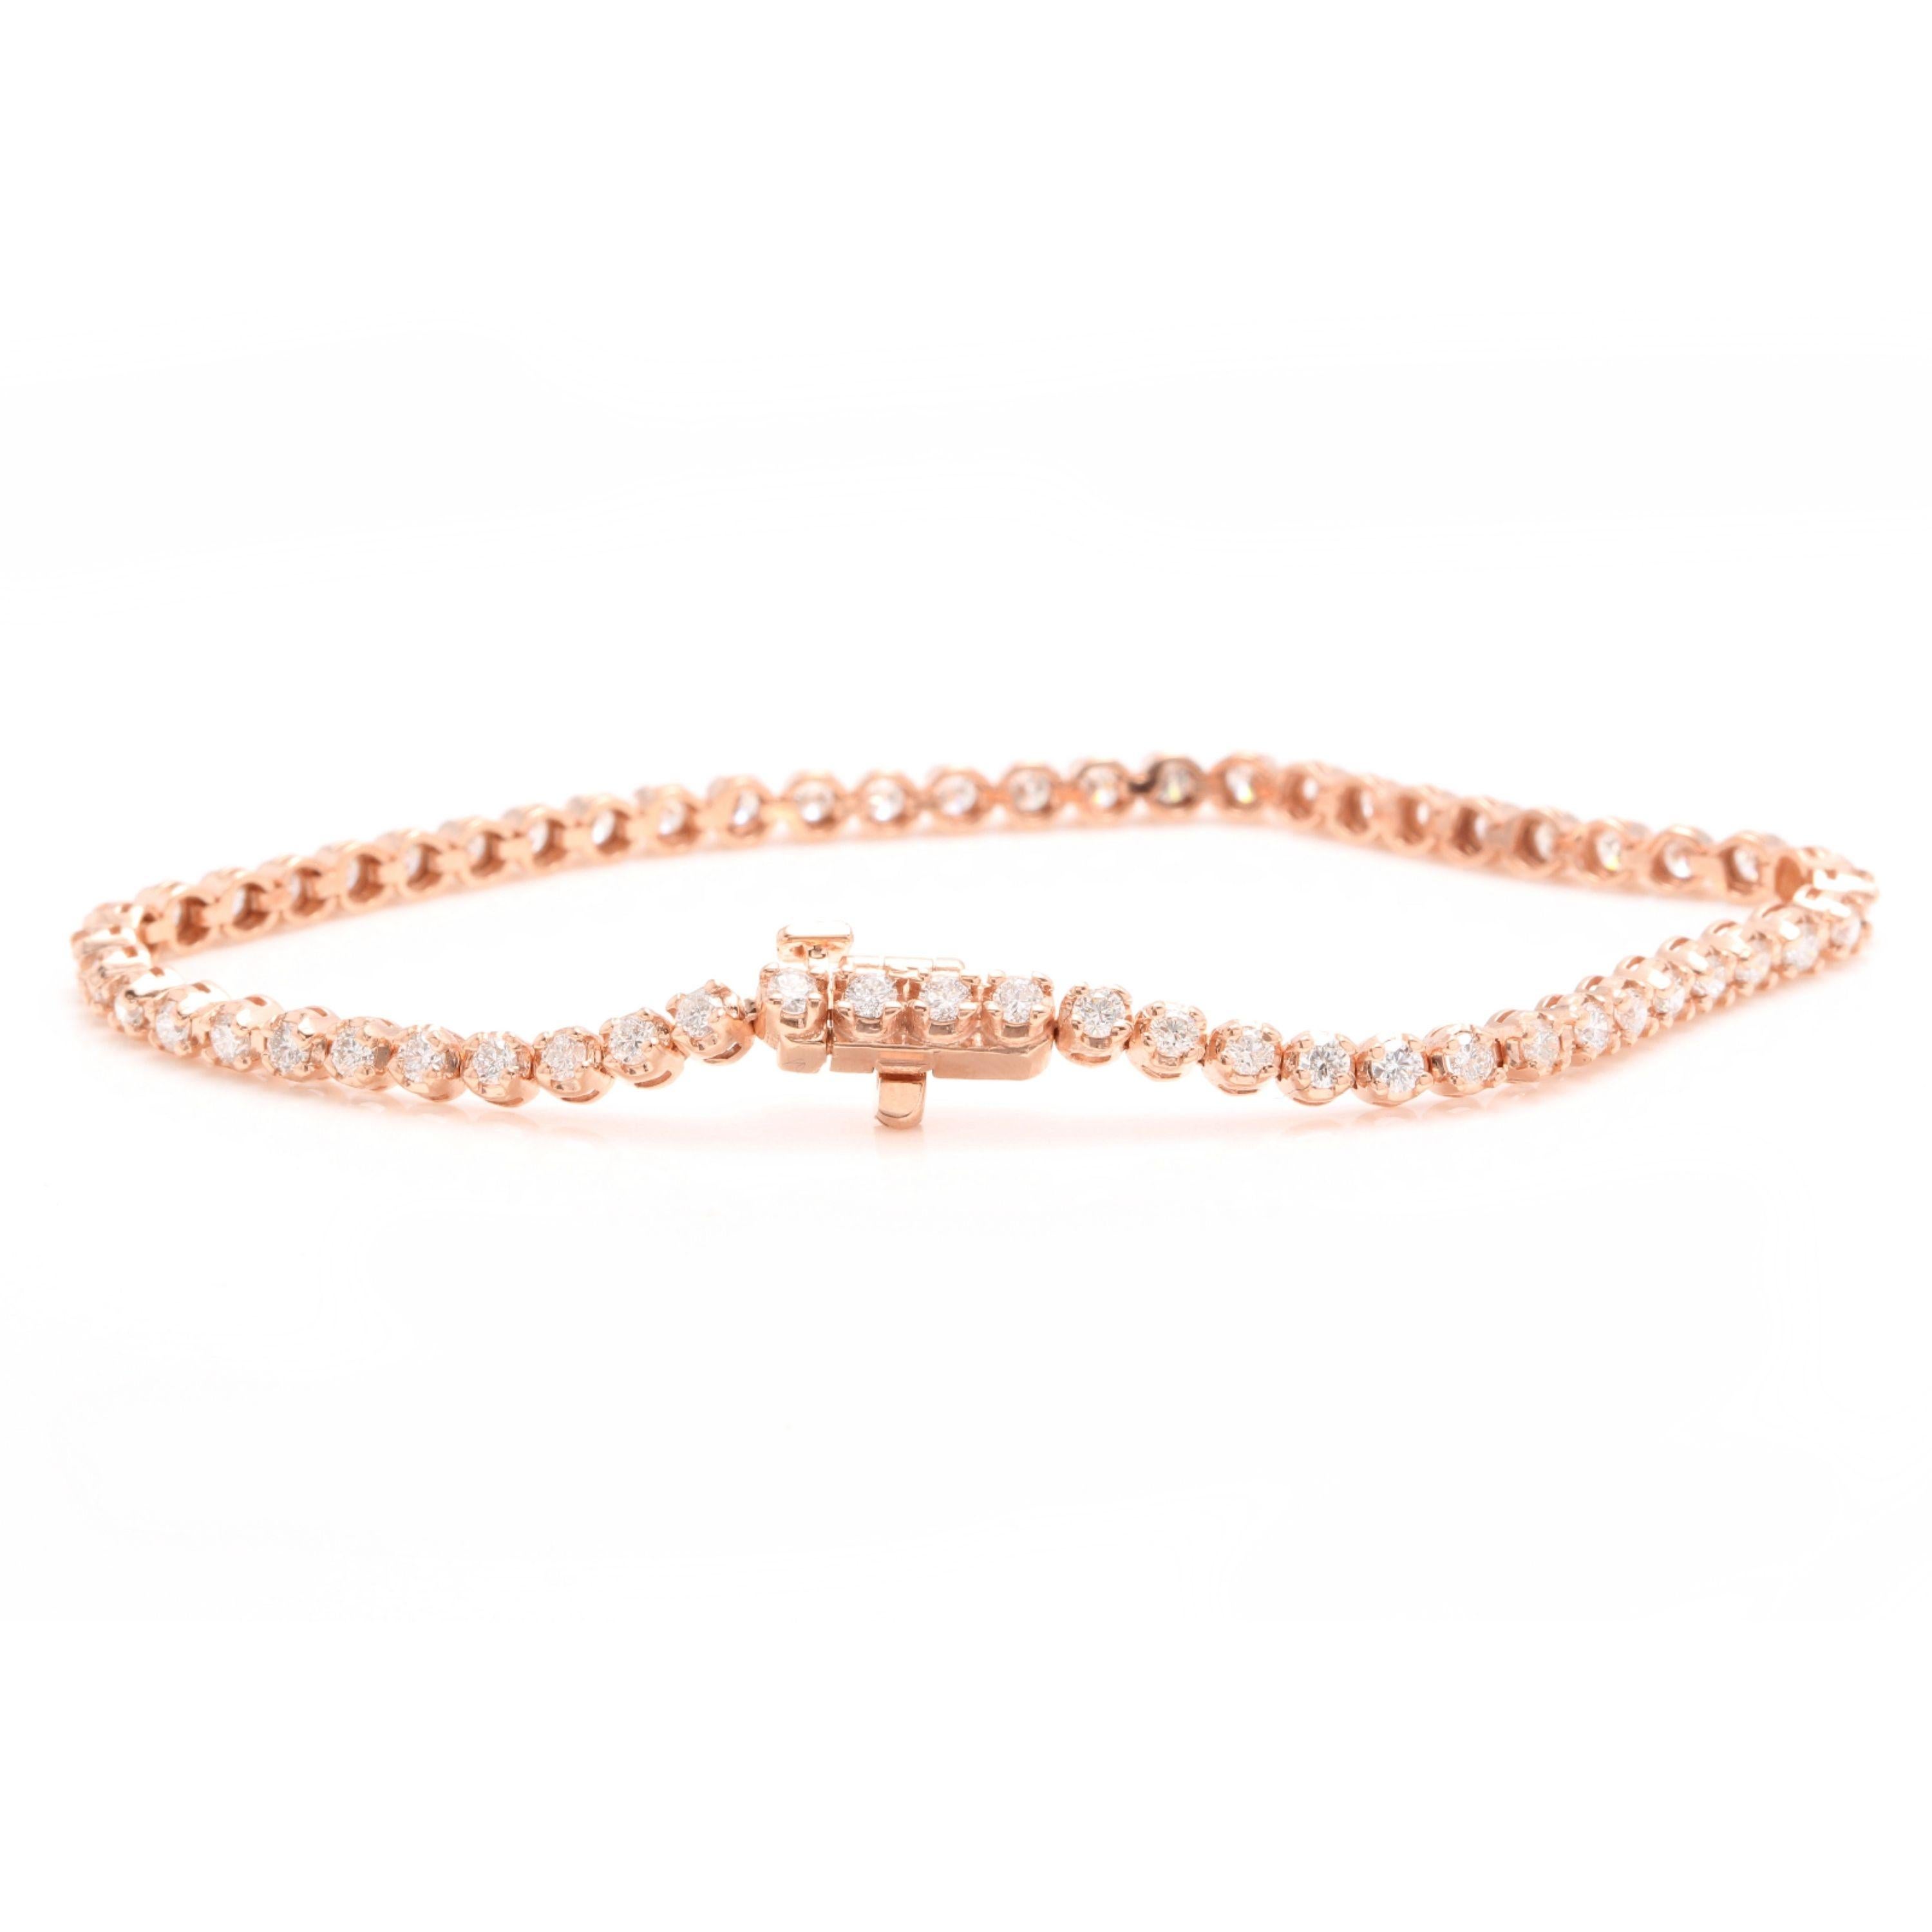 Very Impressive 3.00 Carats Natural Diamond 14K Solid Rose Gold Bracelet

STAMPED: 14K

Total Natural Round Diamonds Weight: 3.00 Carats (58 diamonds) (color G-H / Clarity SI1-SI2)

Bracelet Length is: 7 inches

Width: 3.00mm

Bracelet total weight: